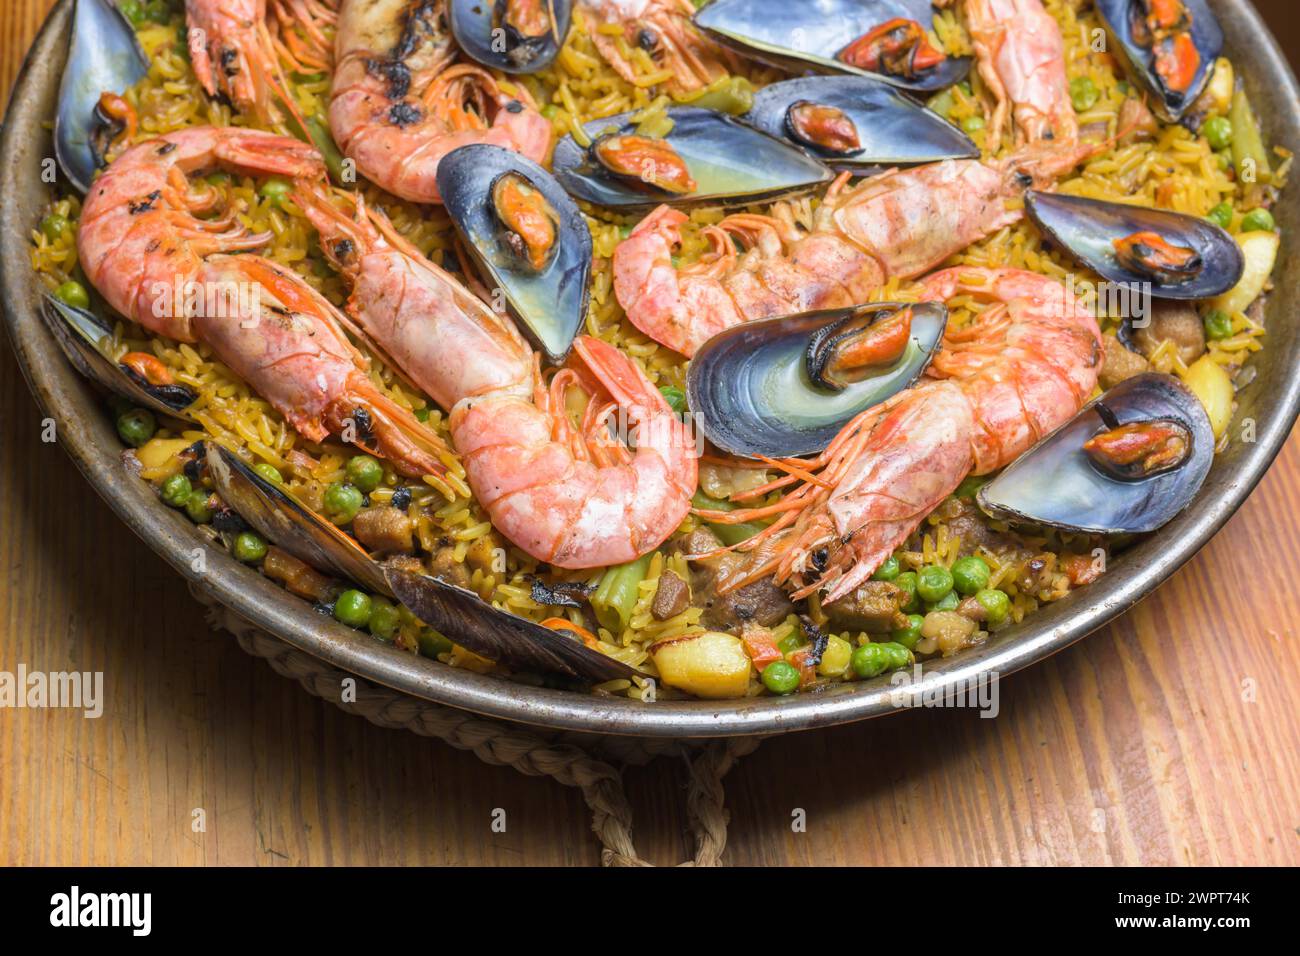 Brightly colored seafood paella presented in a traditional pan, typical Spanish cuisine, Majorca, Balearic Islands, Spain Stock Photo